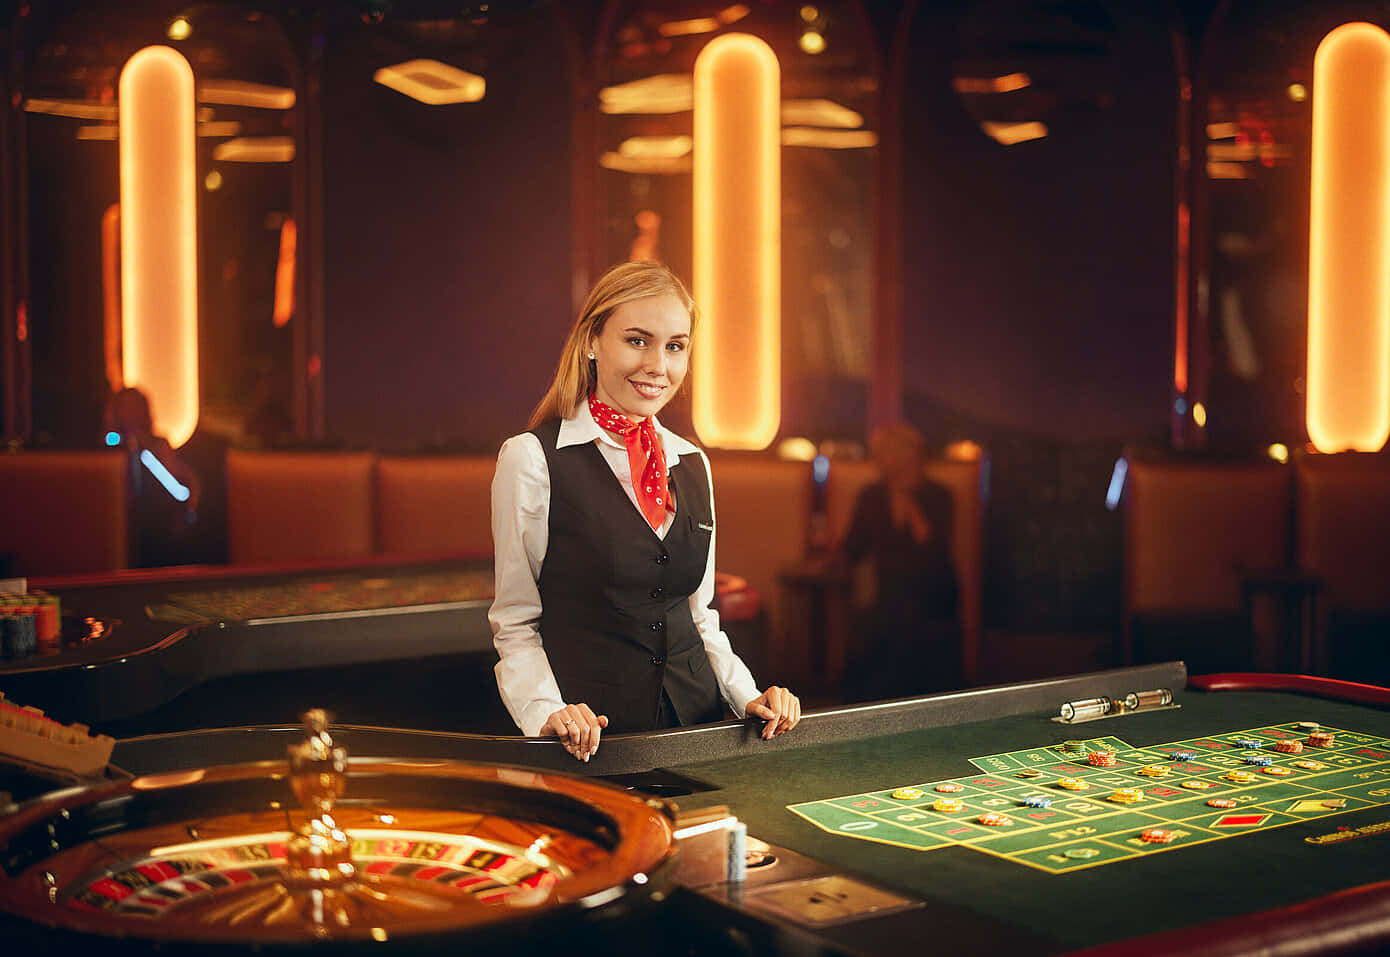 Casino Dealer With A Roulette Wallpaper